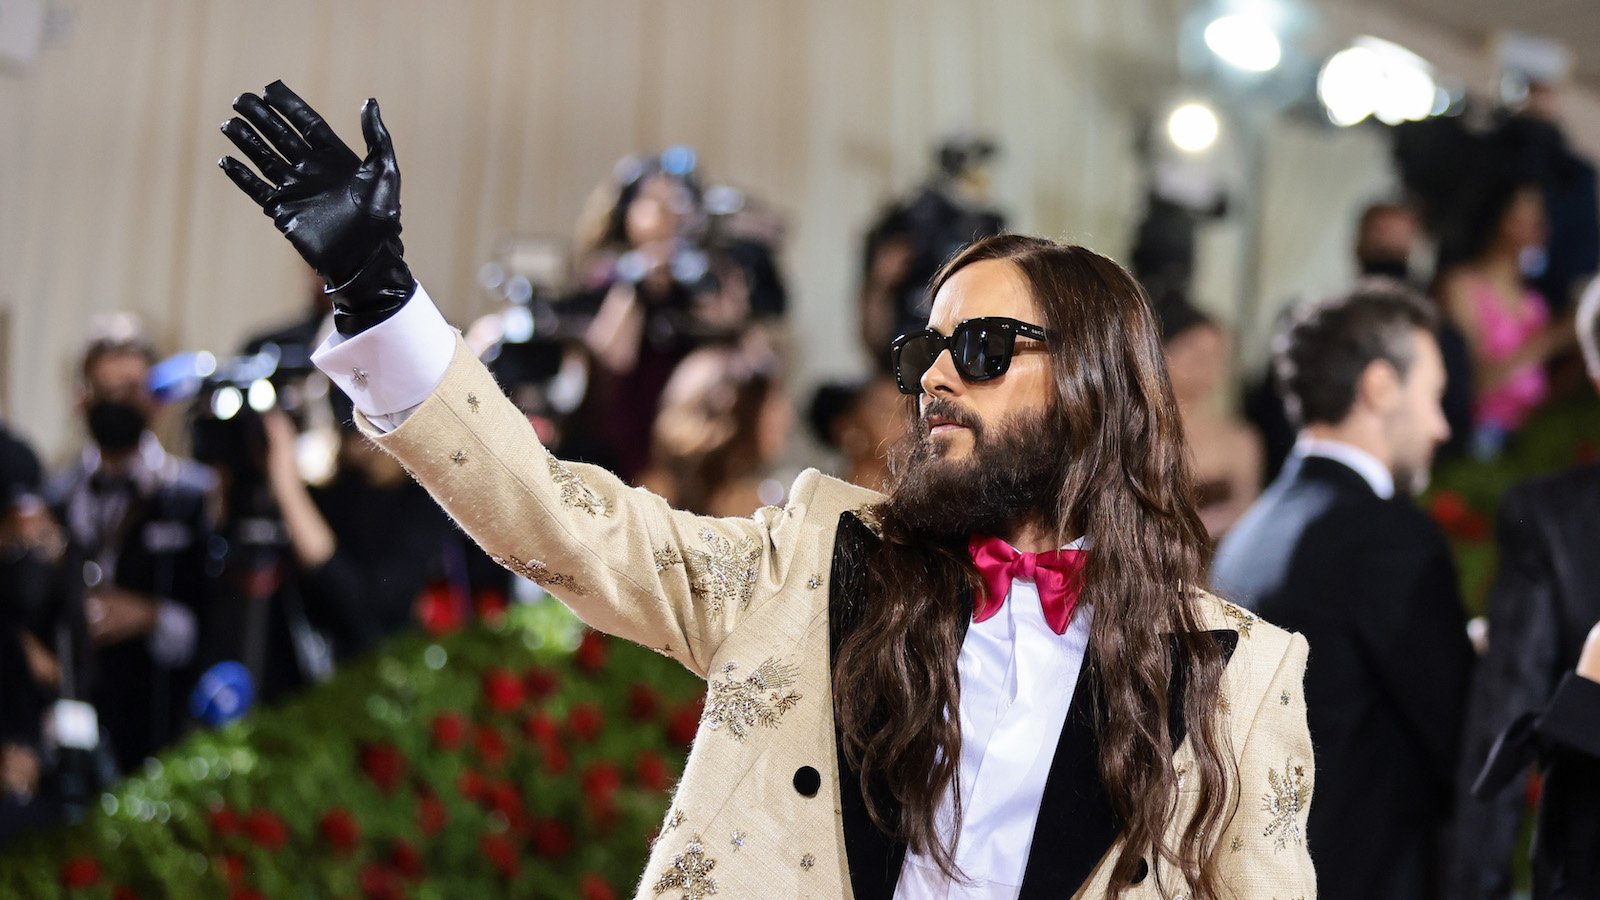 Jared Leto Has Finally, Definitely, Shown up to the 2022 Met Gala